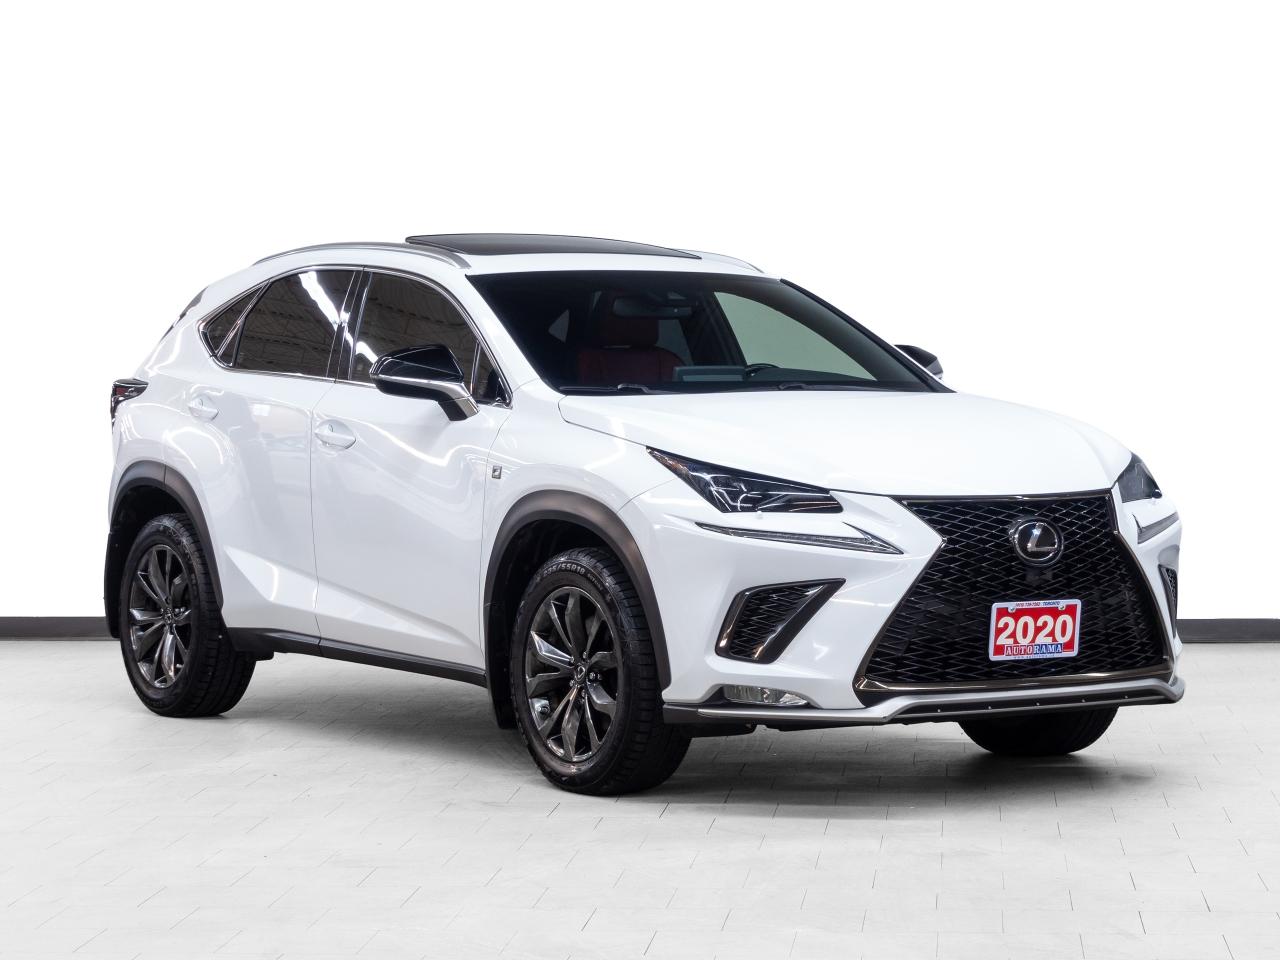 Used 2020 Lexus NX F-SPORT | AWD | Red Leather | Sunroof | ACCfor 